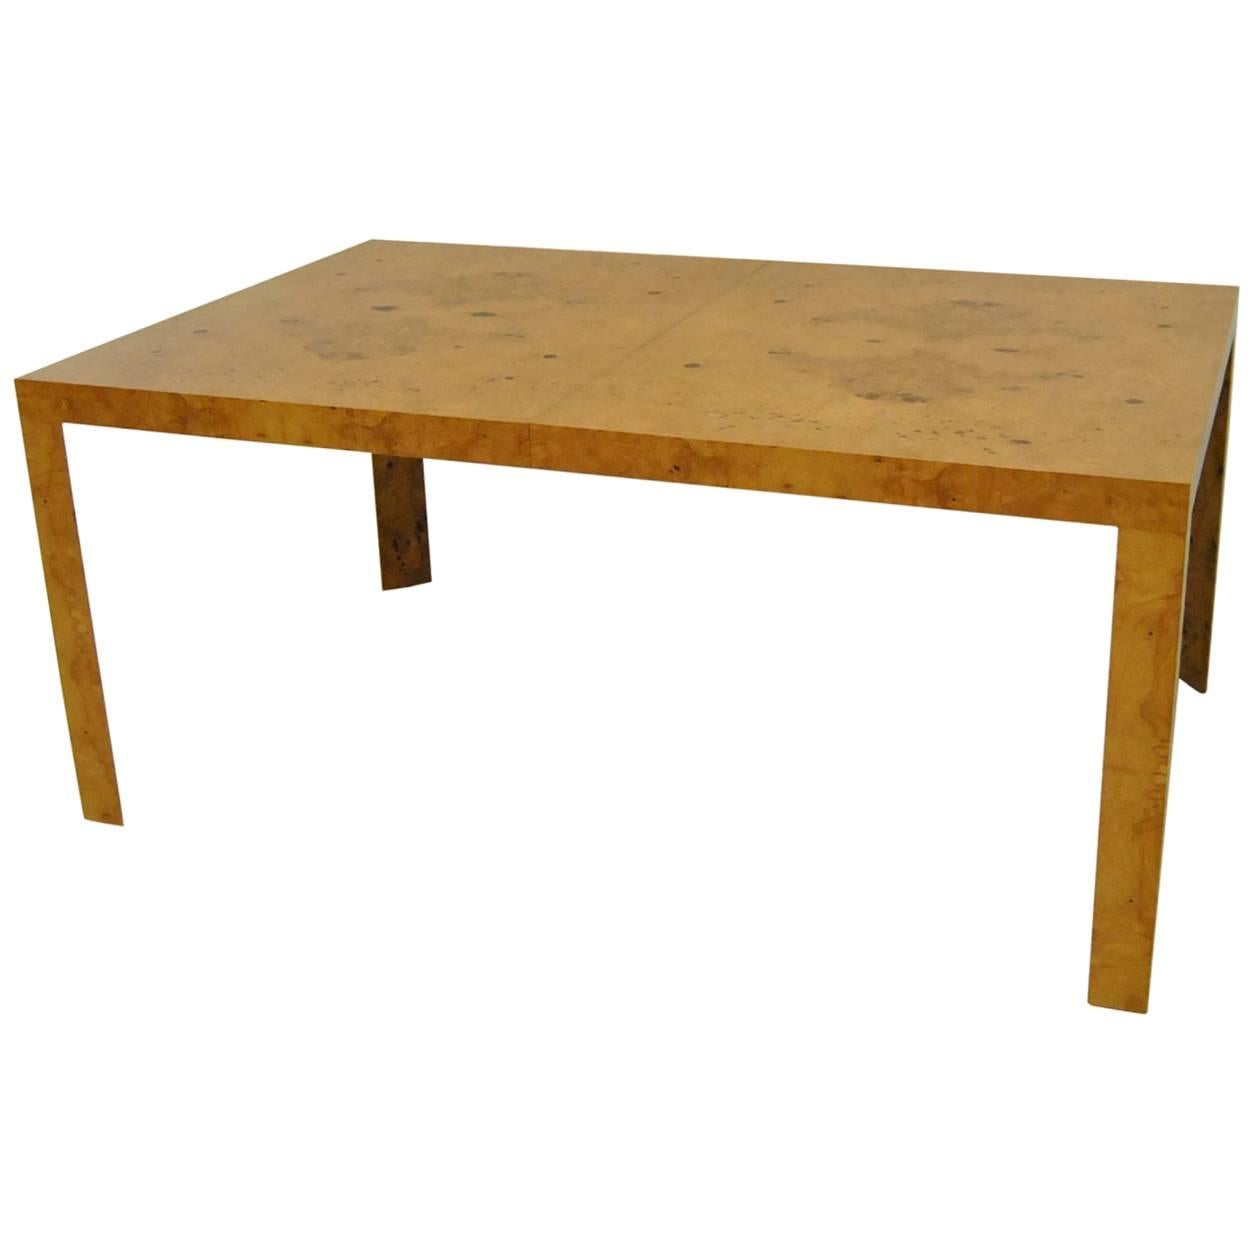 Burled Olive Wood Parsons Dining Table by Edward Wormley for Dunbar